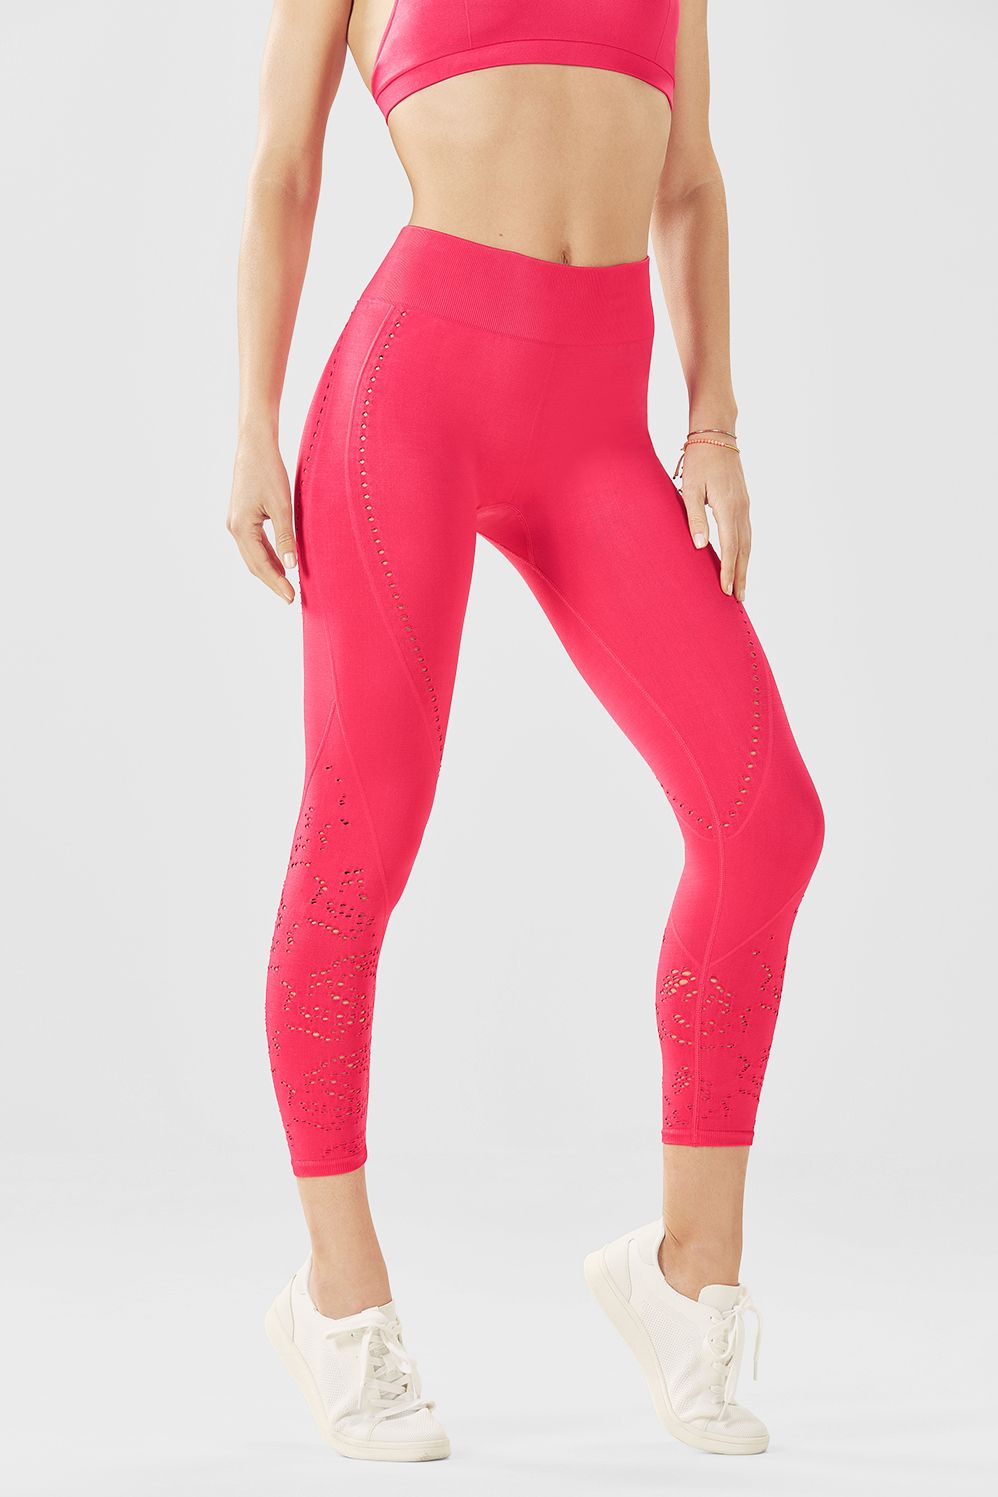 Fabletics Capri Seamless High-Waisted Solid Womens Pink Size XXS | Fabletics